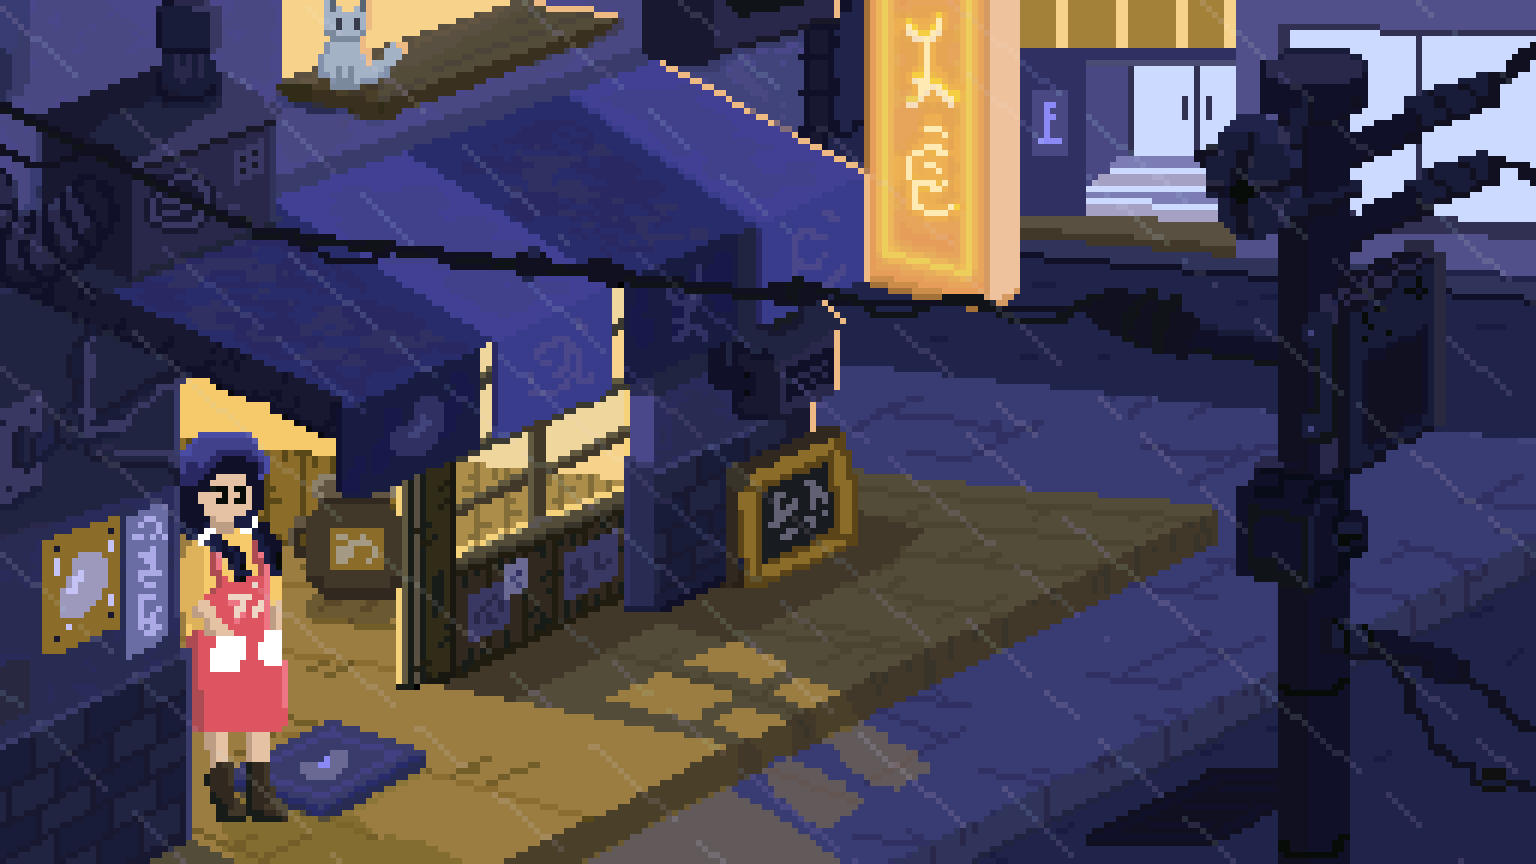 Bean shop in a rainy day animation bean shop break from work city city night night pixel animation pixel art pixel artwork pixelart rain rain night rainy relax relax moment shop